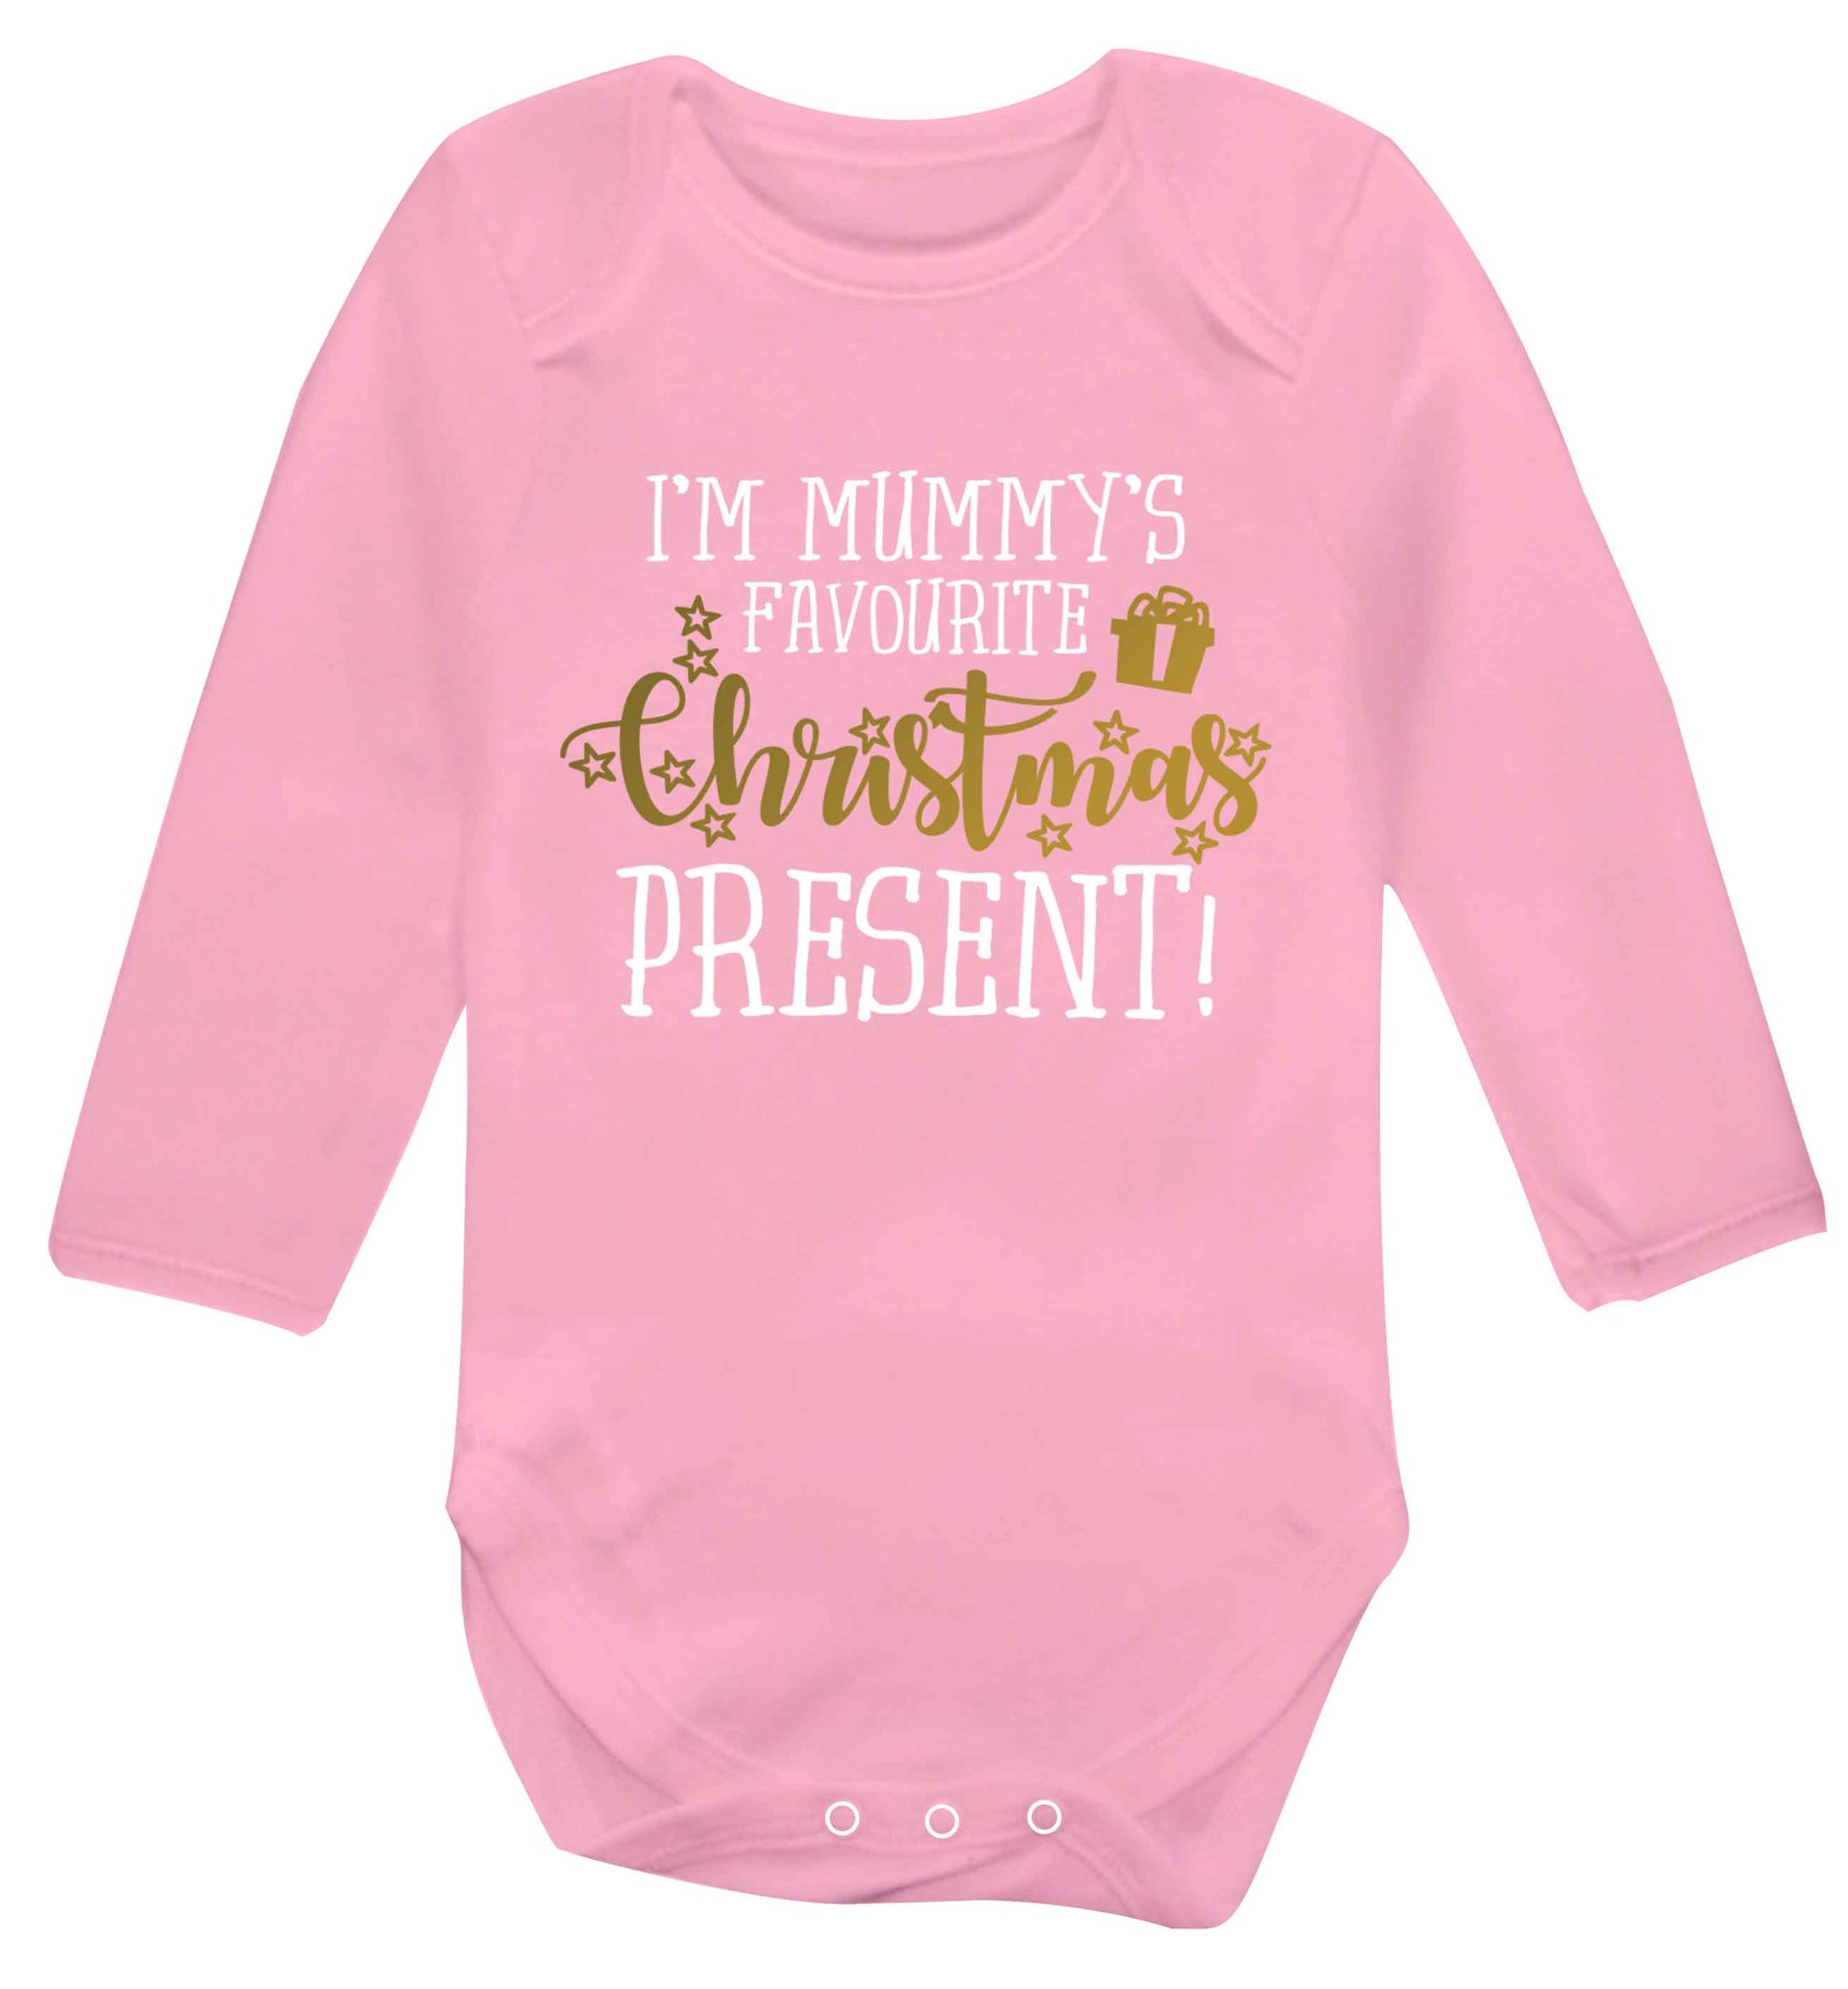 I'm Mummy's favourite Christmas present Baby Vest long sleeved pale pink 6-12 months